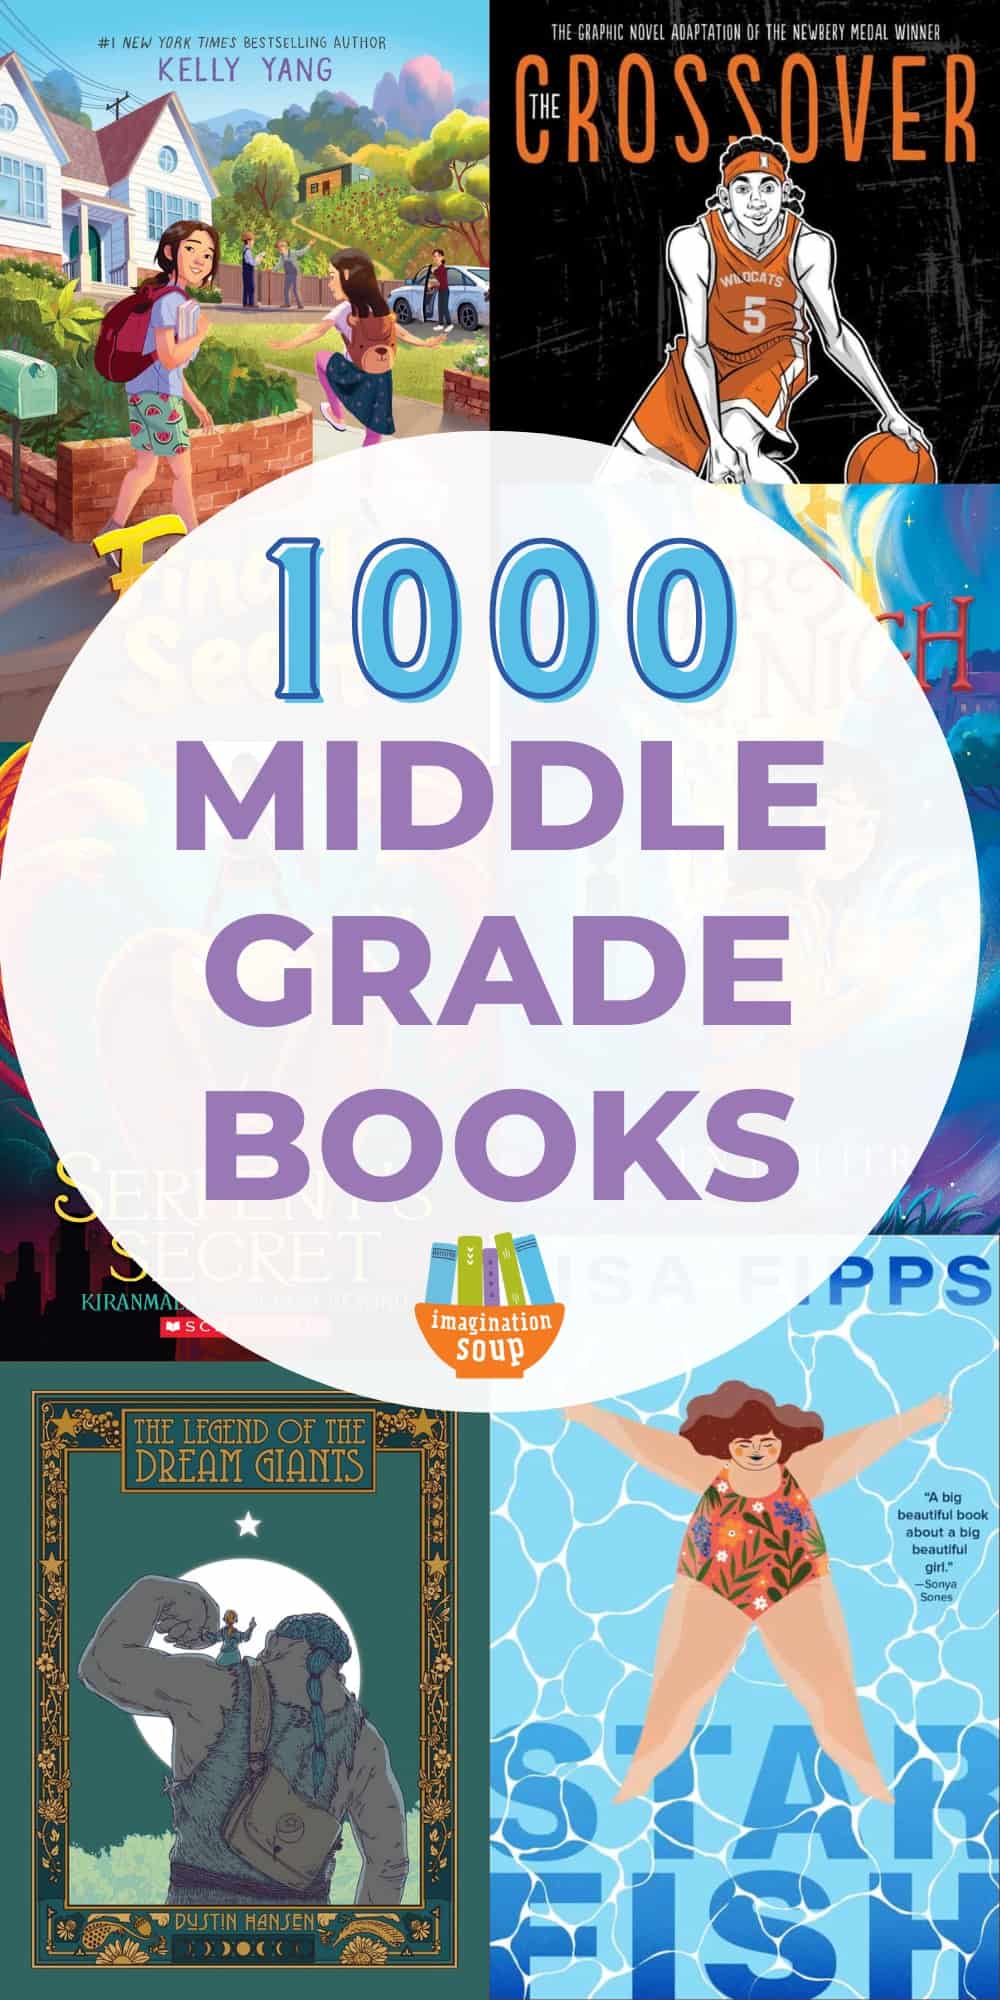 Whether you’re a parent, teacher, or librarian, discover the best middle grade books to recommend, read aloud, and share with kids ages 9 to 12. 